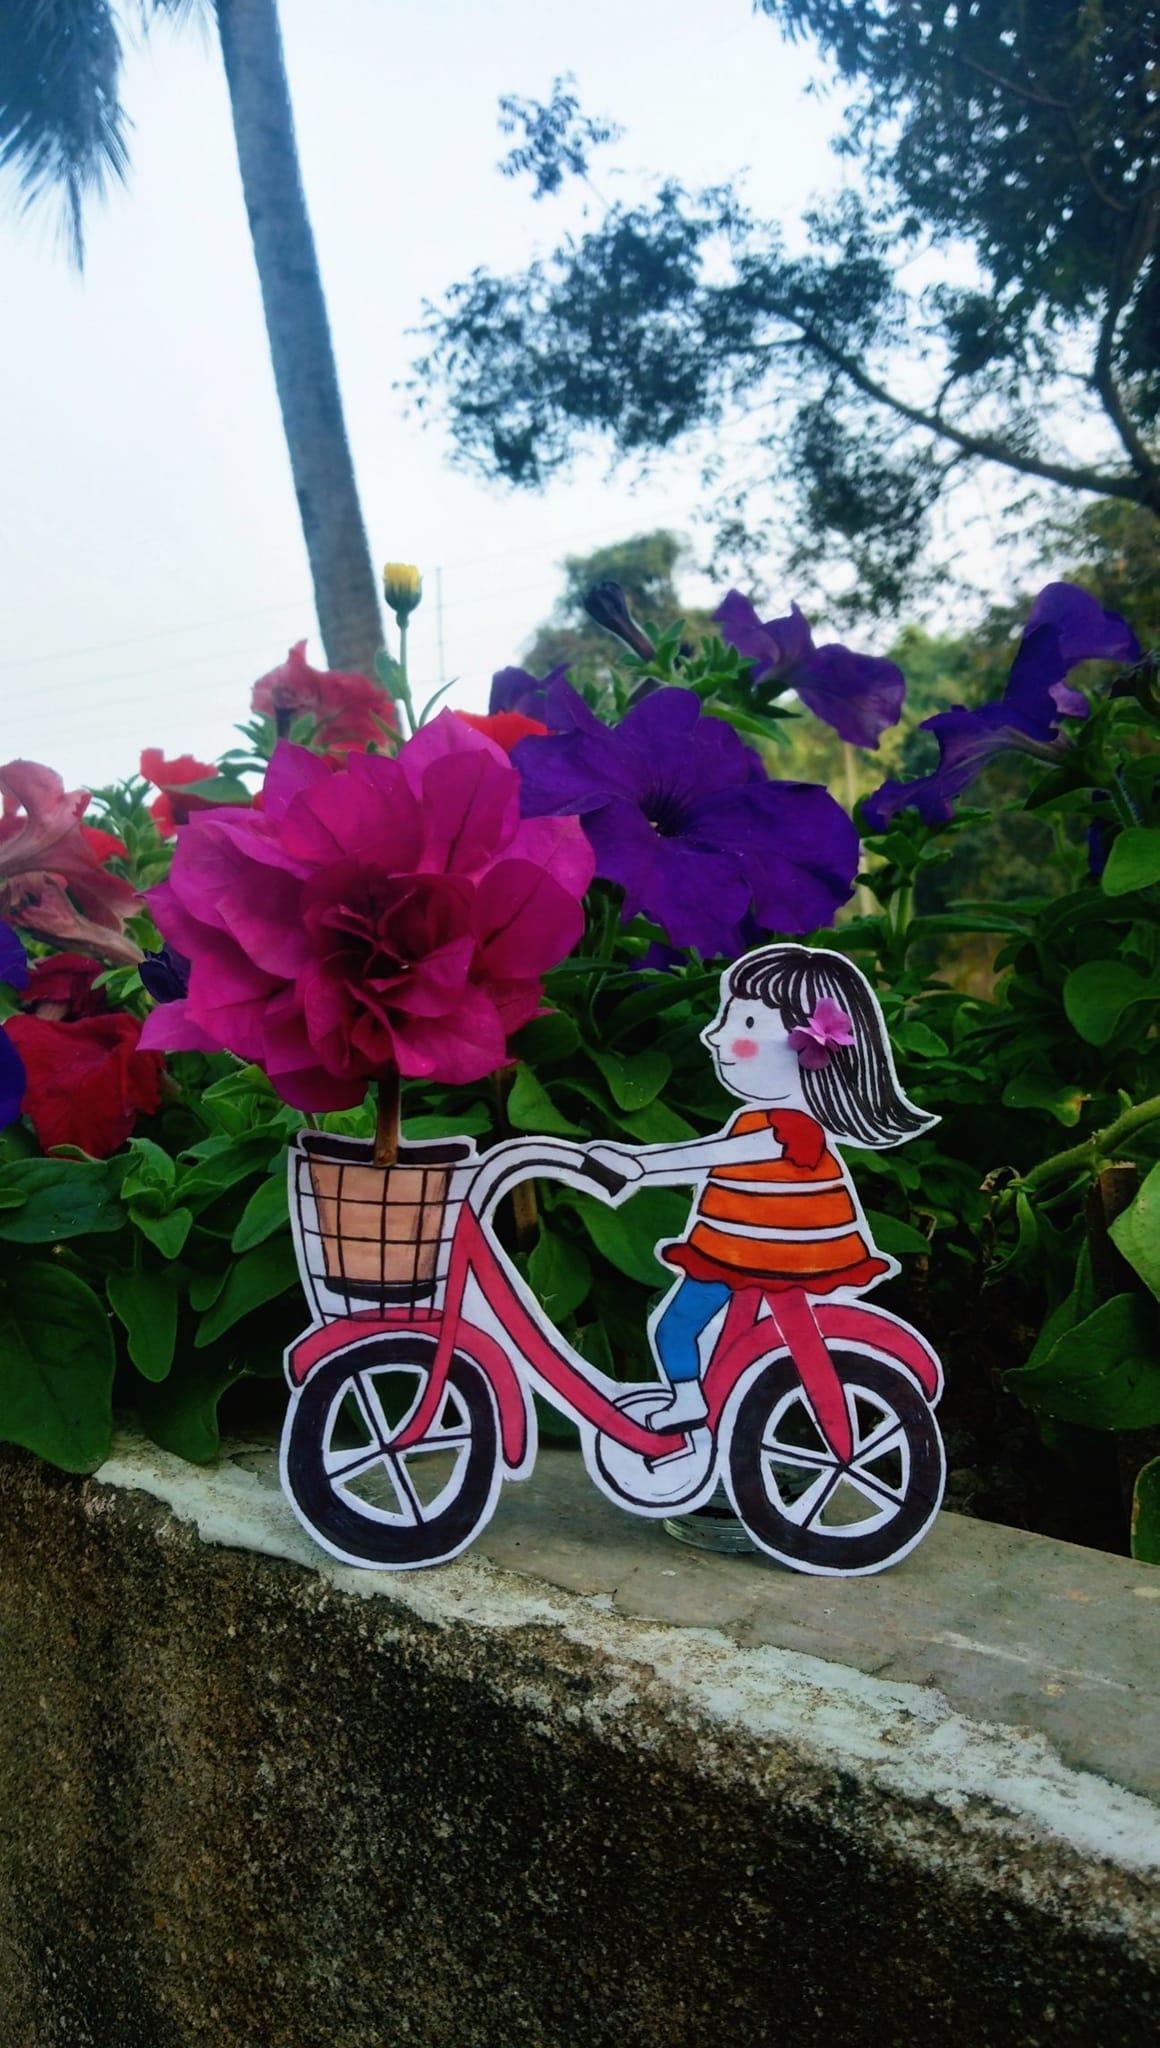 May be an image of bicycle, scooter, flower and text